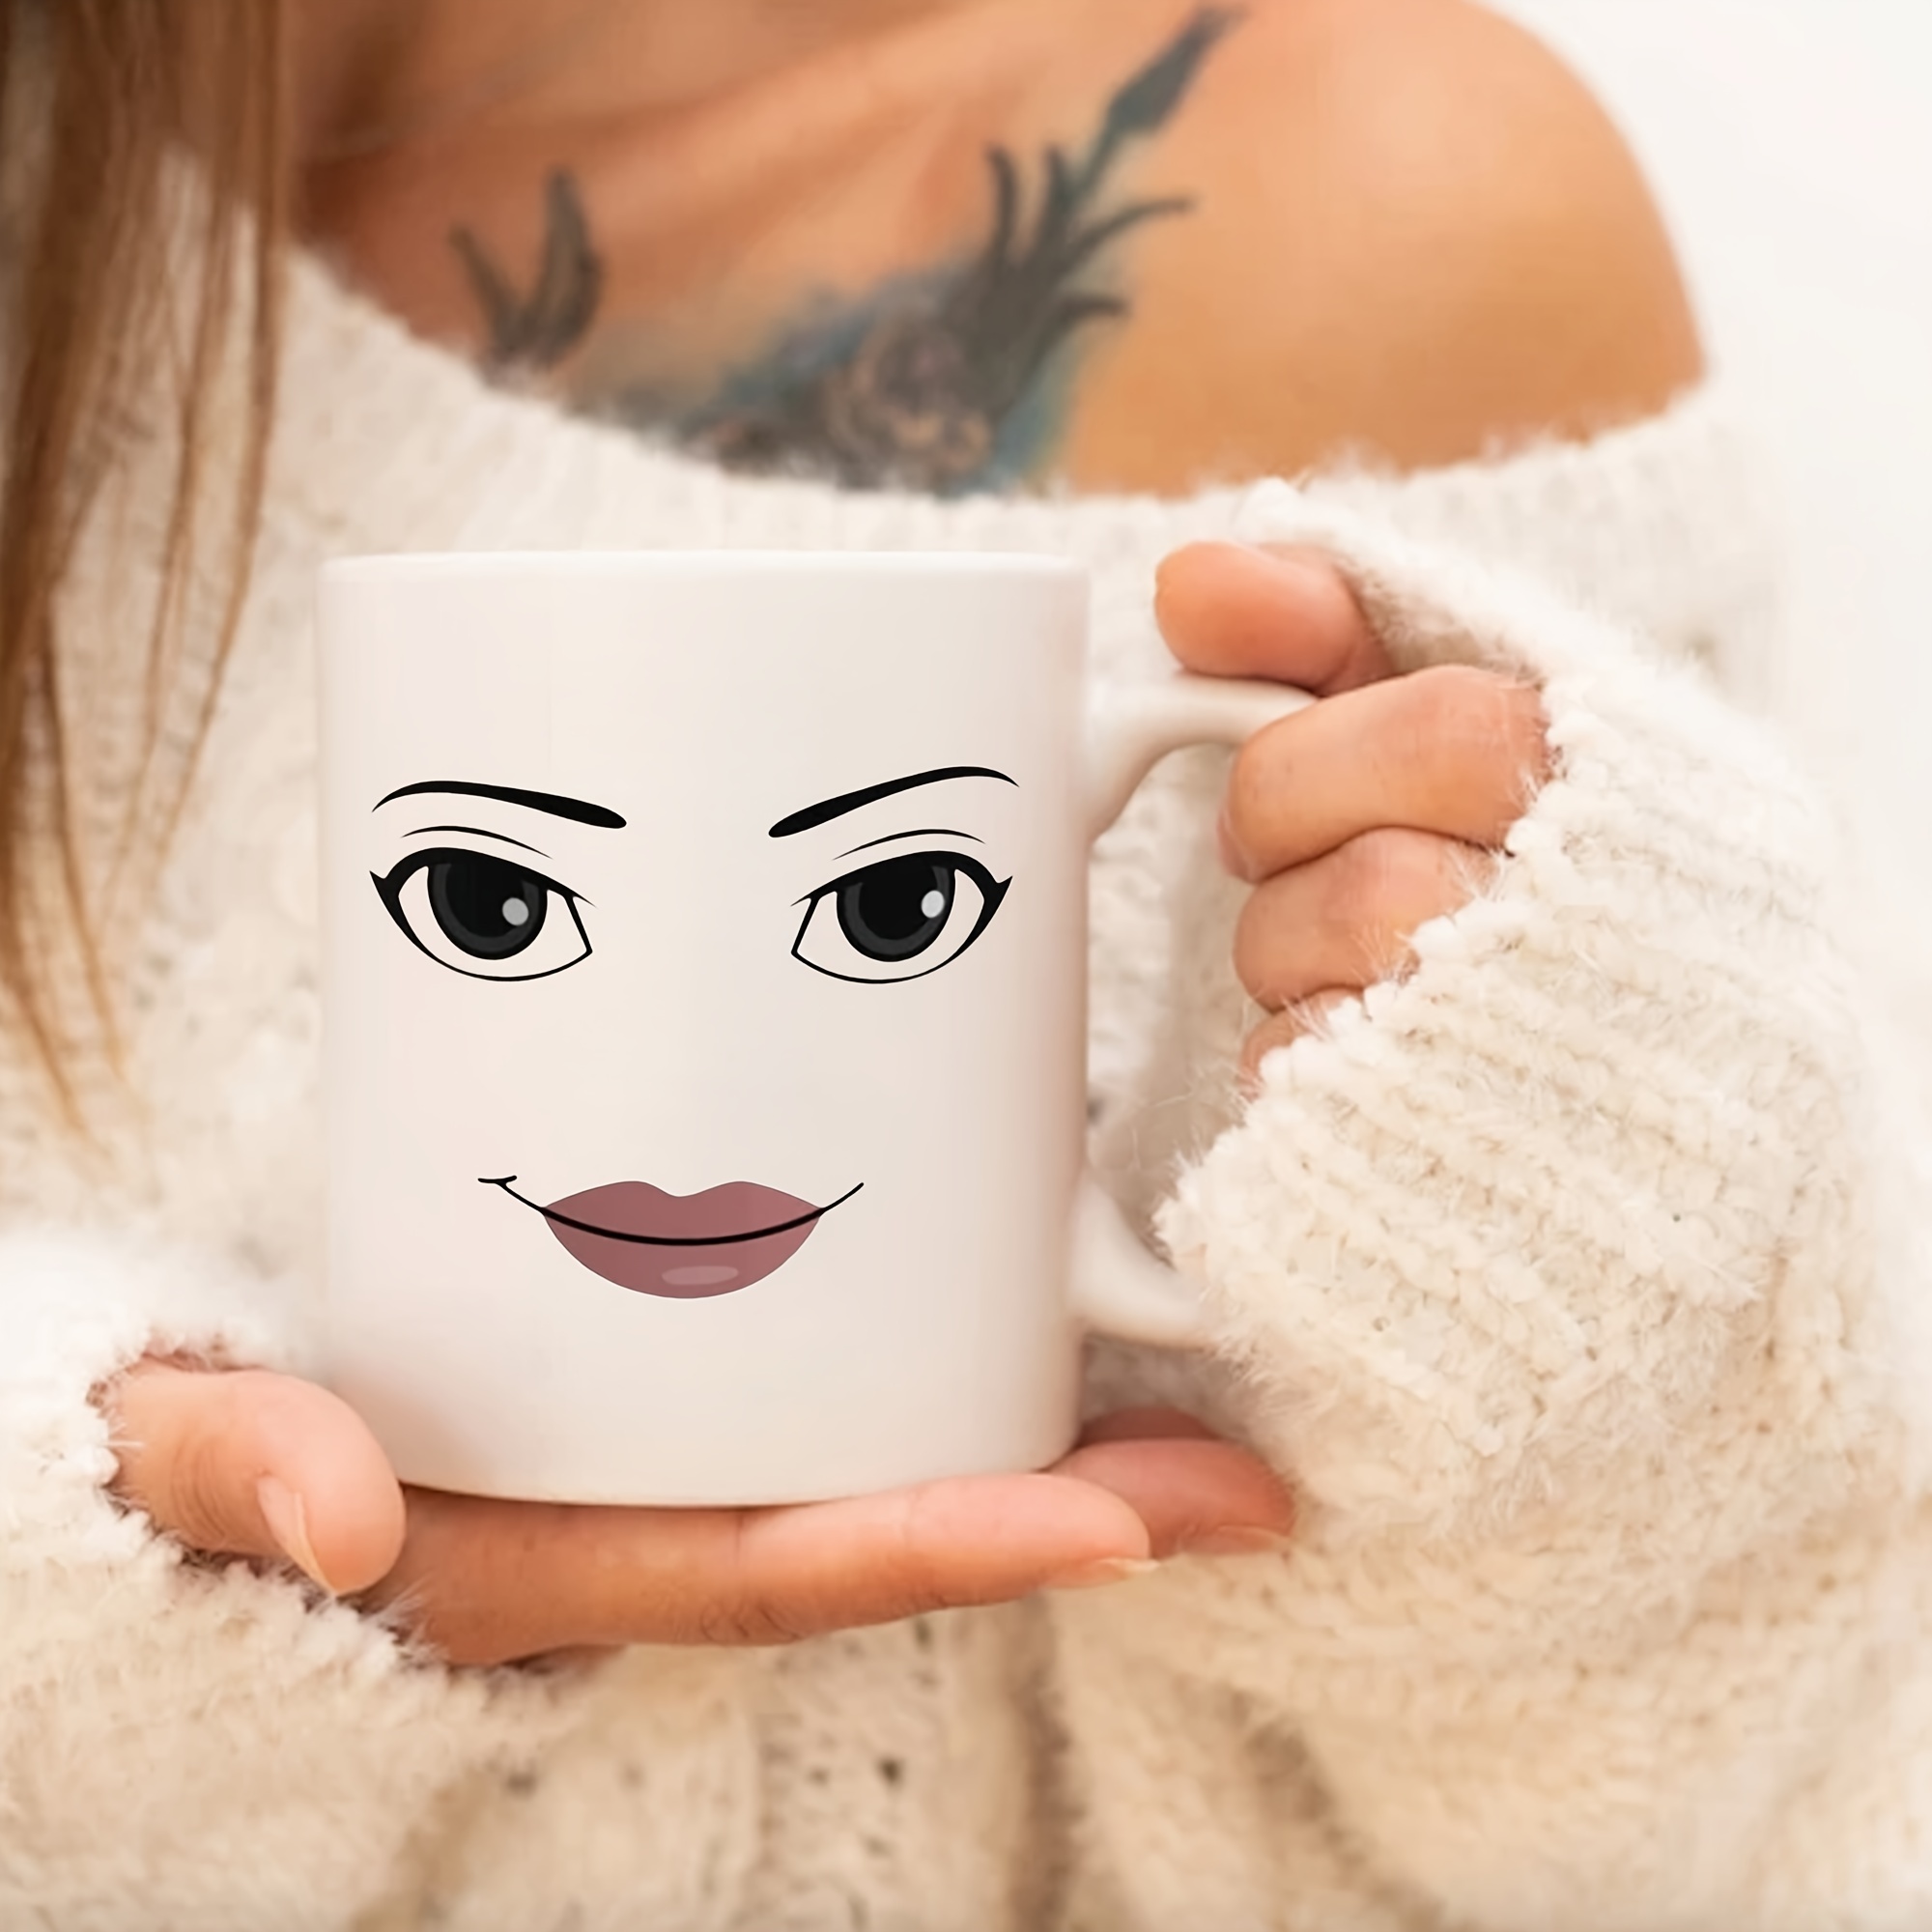 8 funny Valentine's Day mugs on